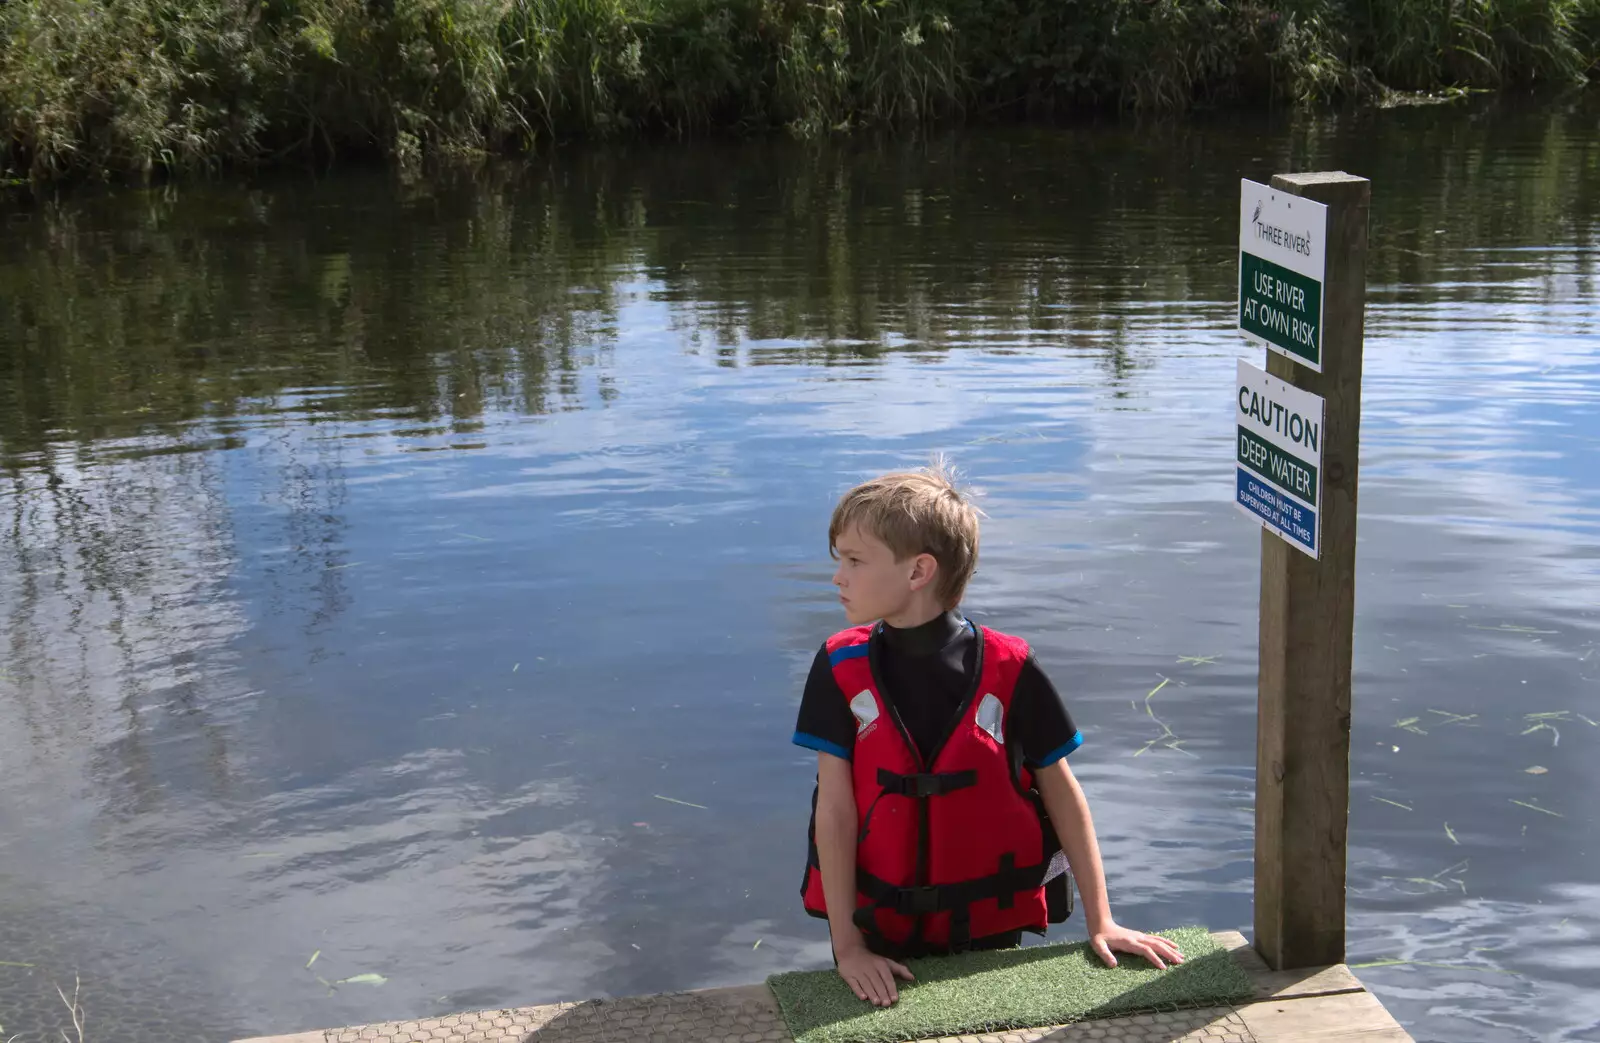 Harry climbs up to the pontoon, from Camping at Three Rivers, Geldeston, Norfolk - 5th September 2020